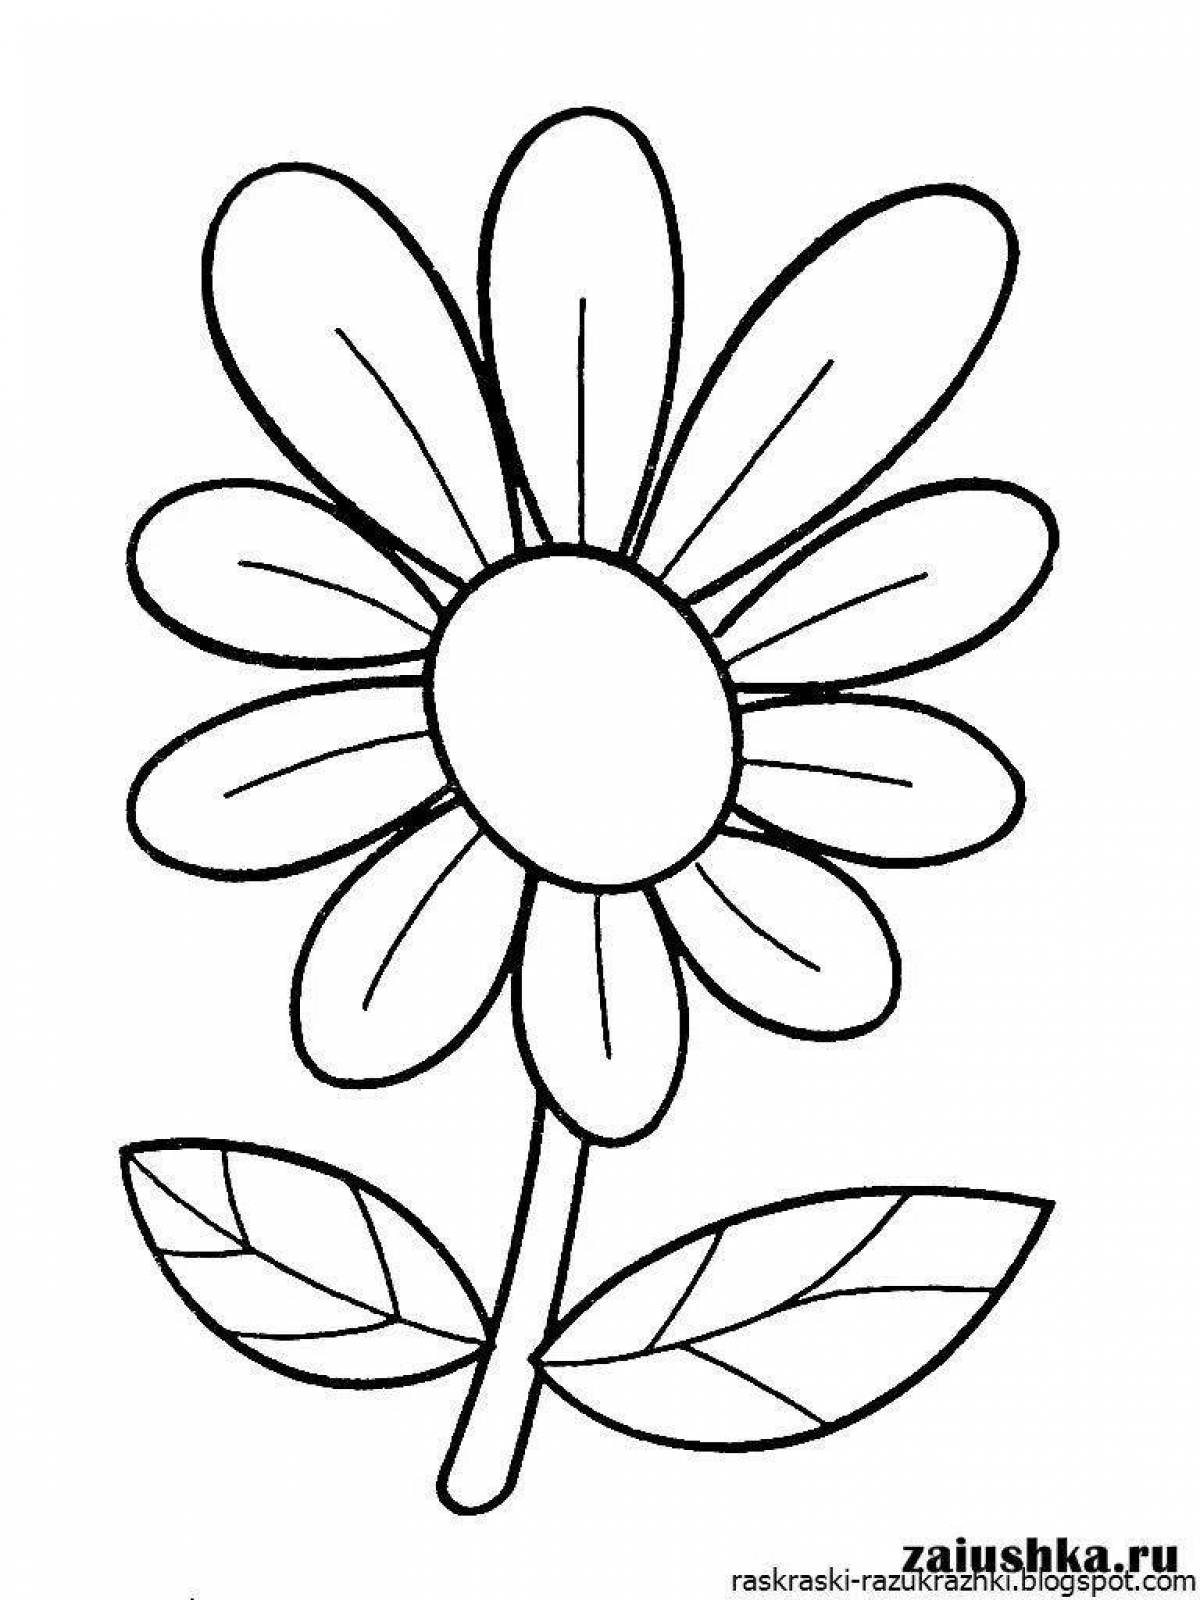 Coloring book glowing chamomile flowers